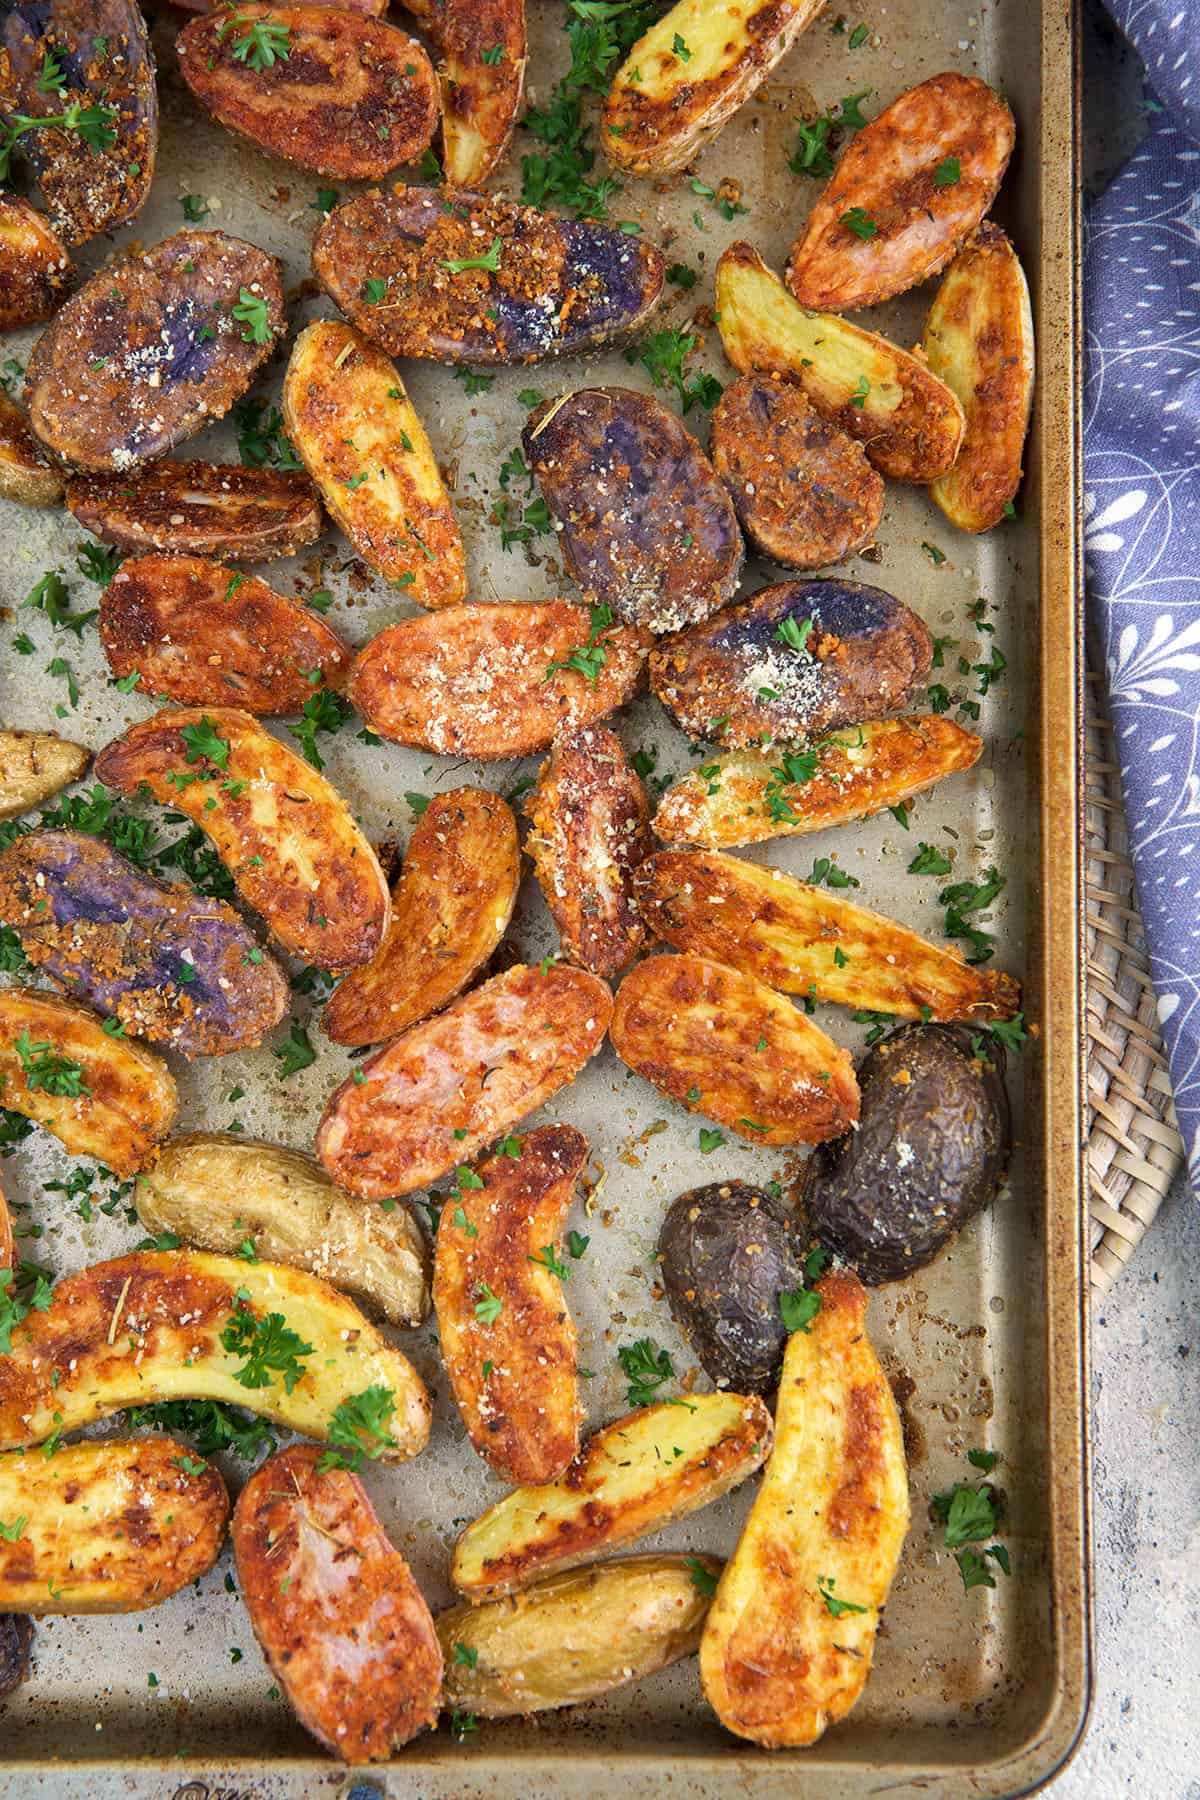 Roasted fingerling potatoes are spread out across a baking sheet.